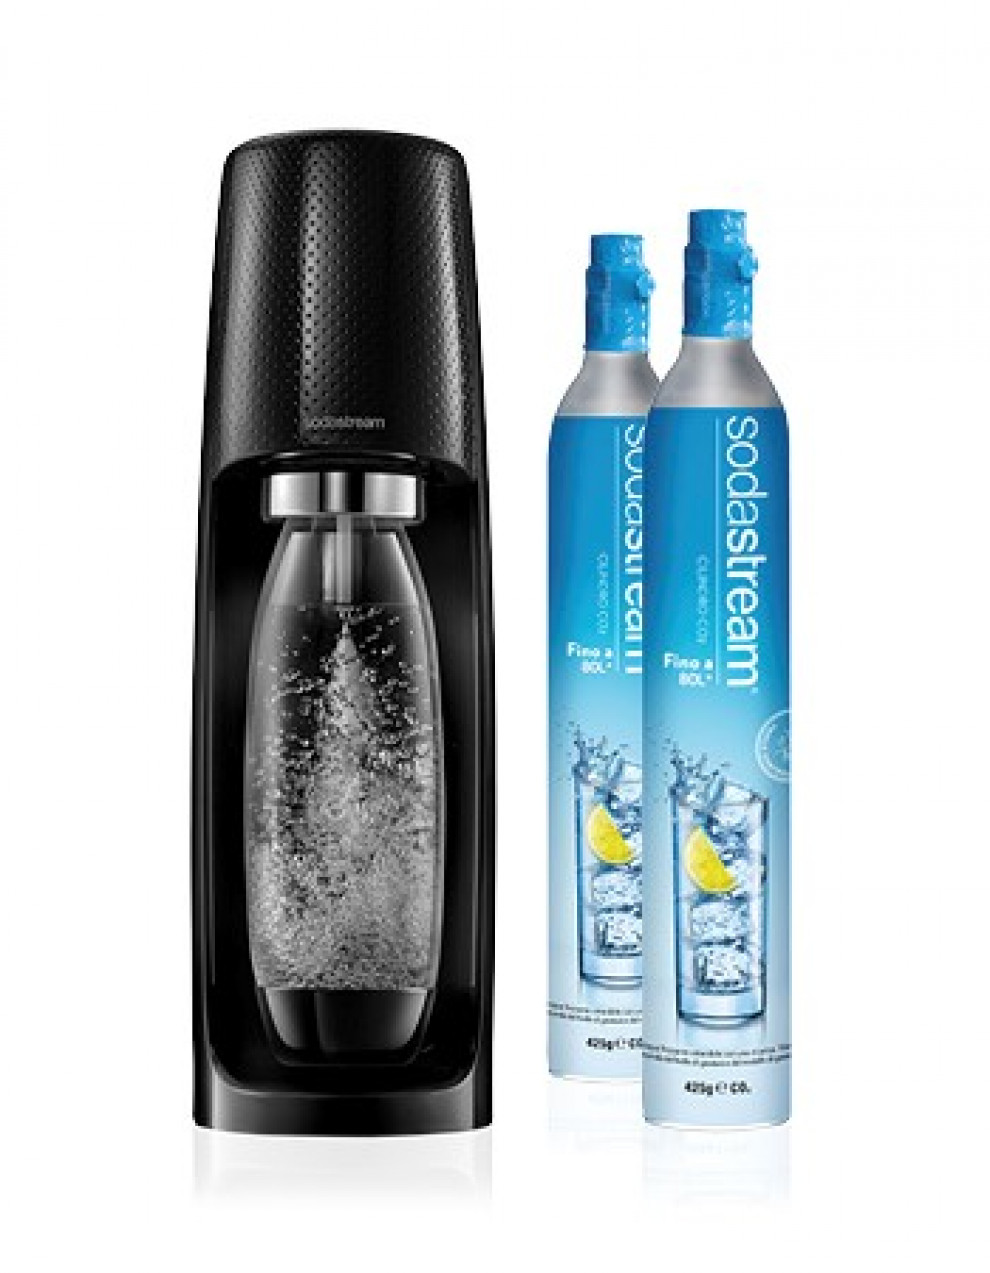 https://www.sodastream.it/file-manager/api/get-image/1159